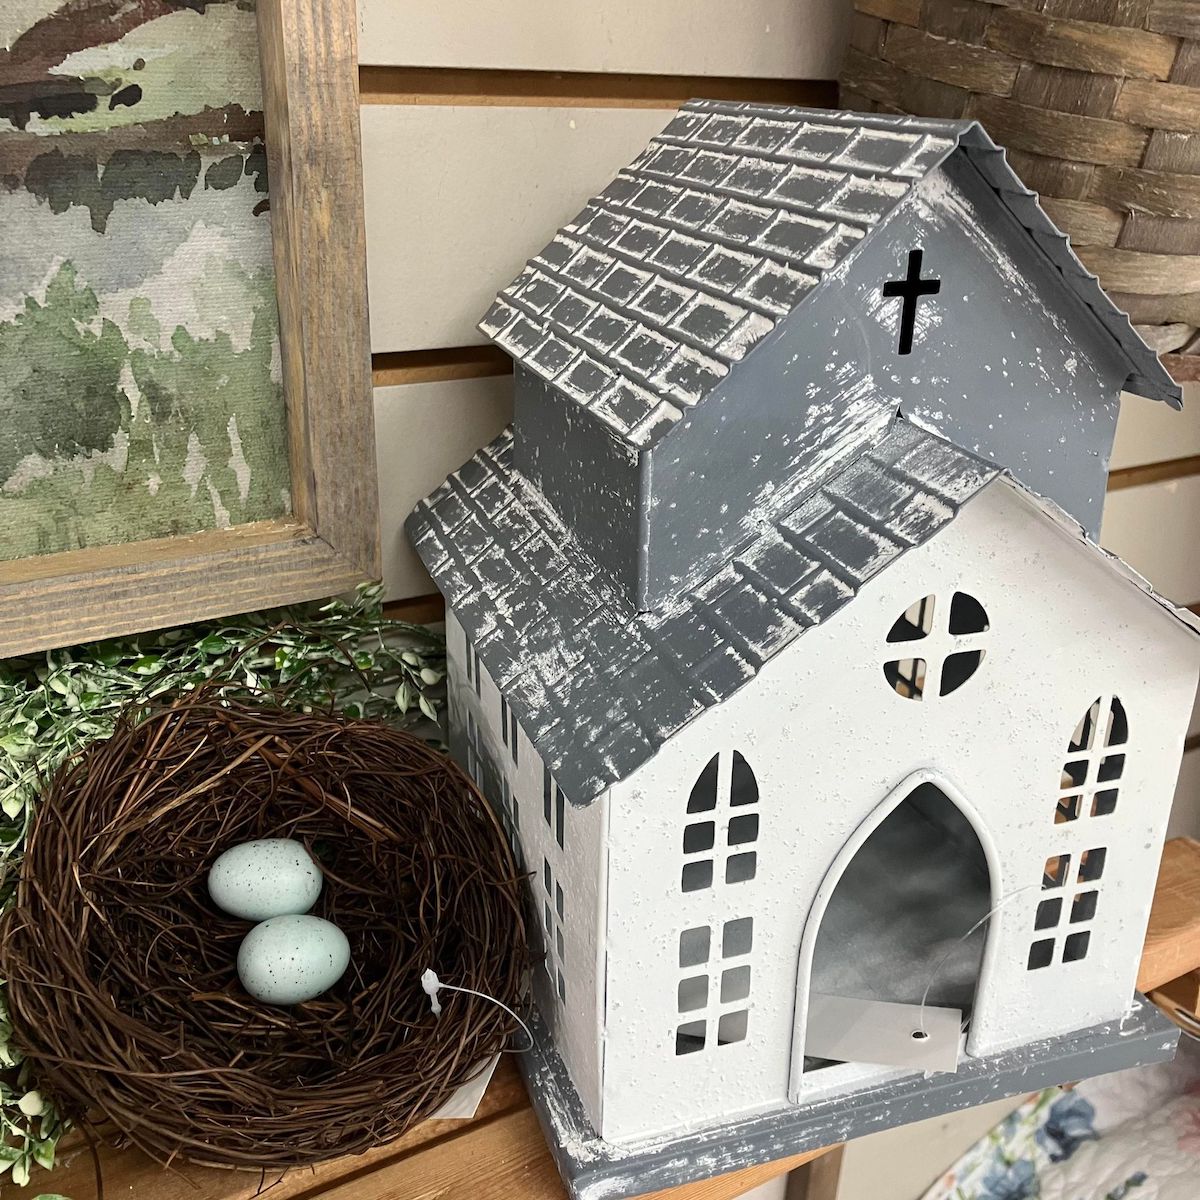 Bird Nest with 2 Blue Eggs shown with Chapel